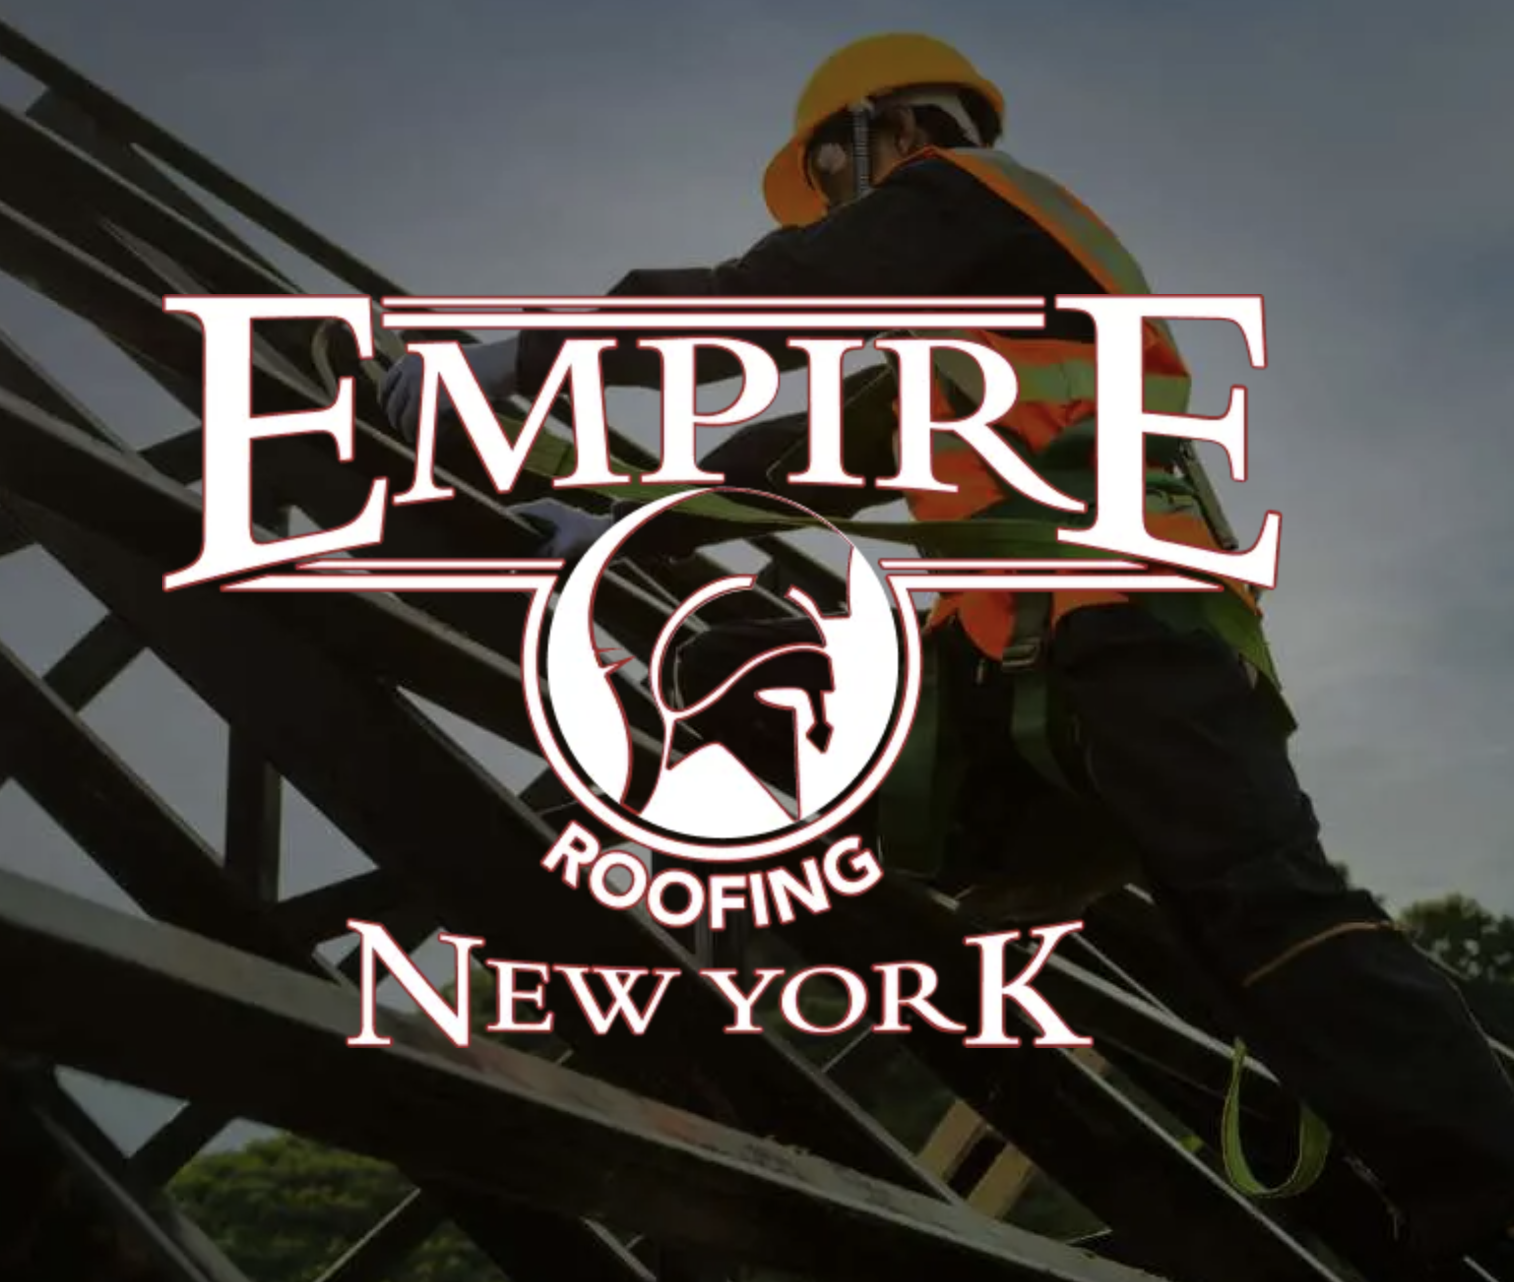 Empire Roofing of New York Enhances Roofing Knowledge with New Educational Series